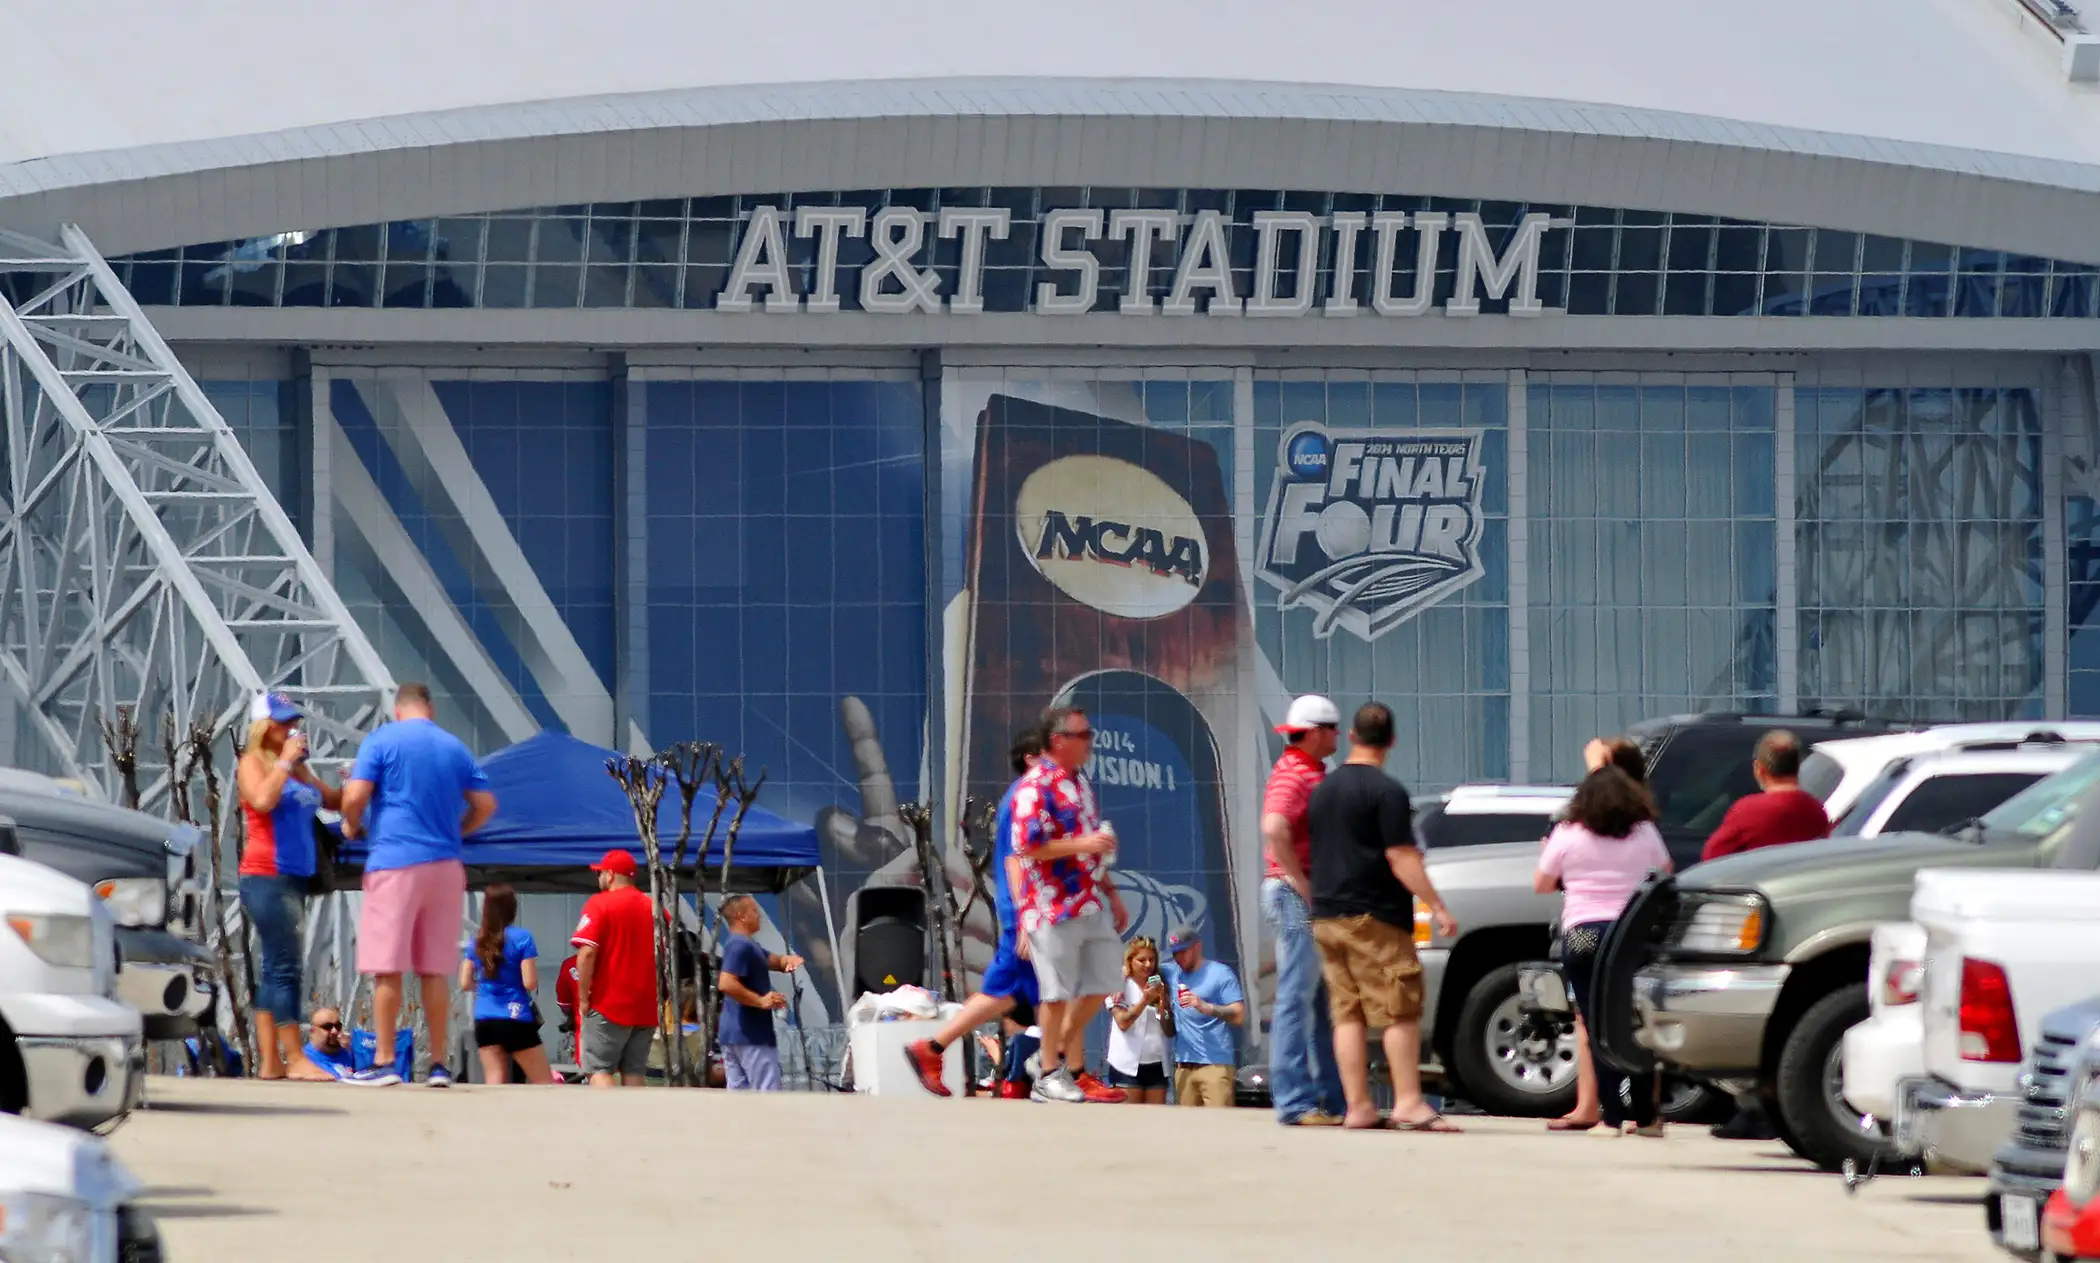 Baseball fans tailgate in the parking lots next to At&amp;T Stadium, March 31, 2014.